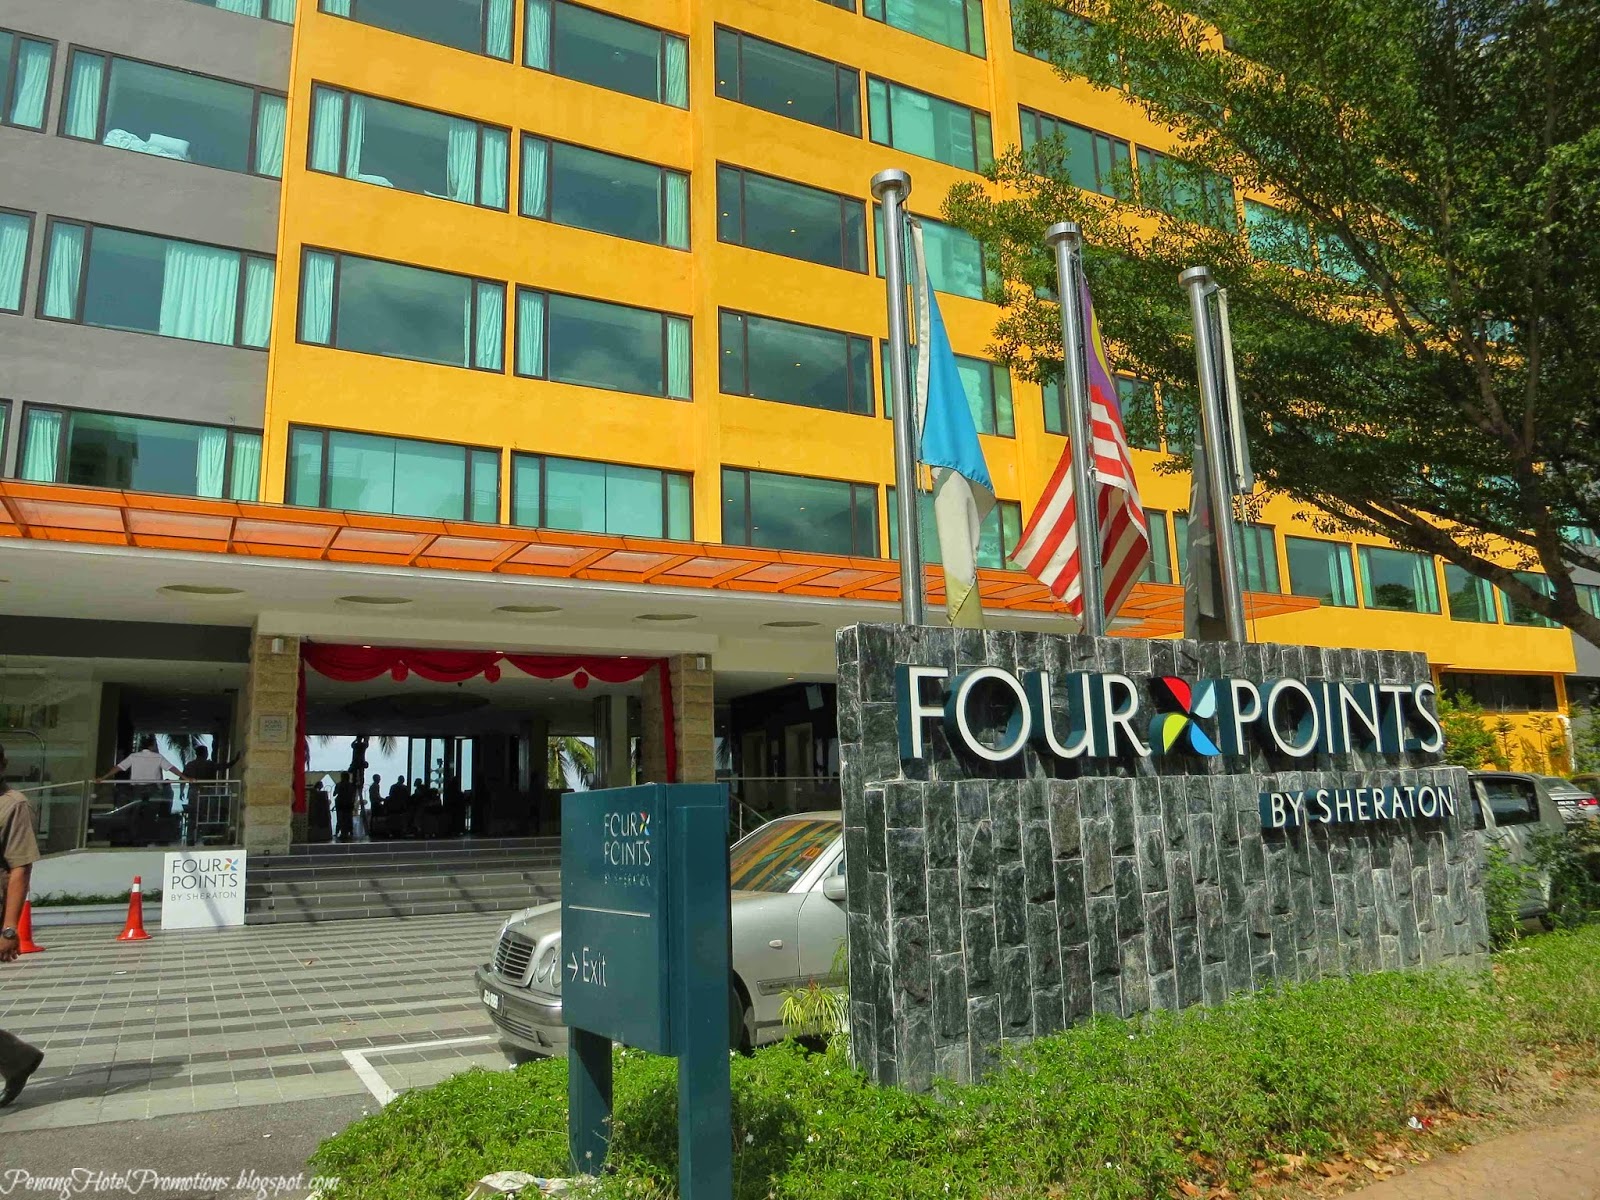 Penang Hotel Promotions: Mother's Day Buffet Lunch @ Four Points by